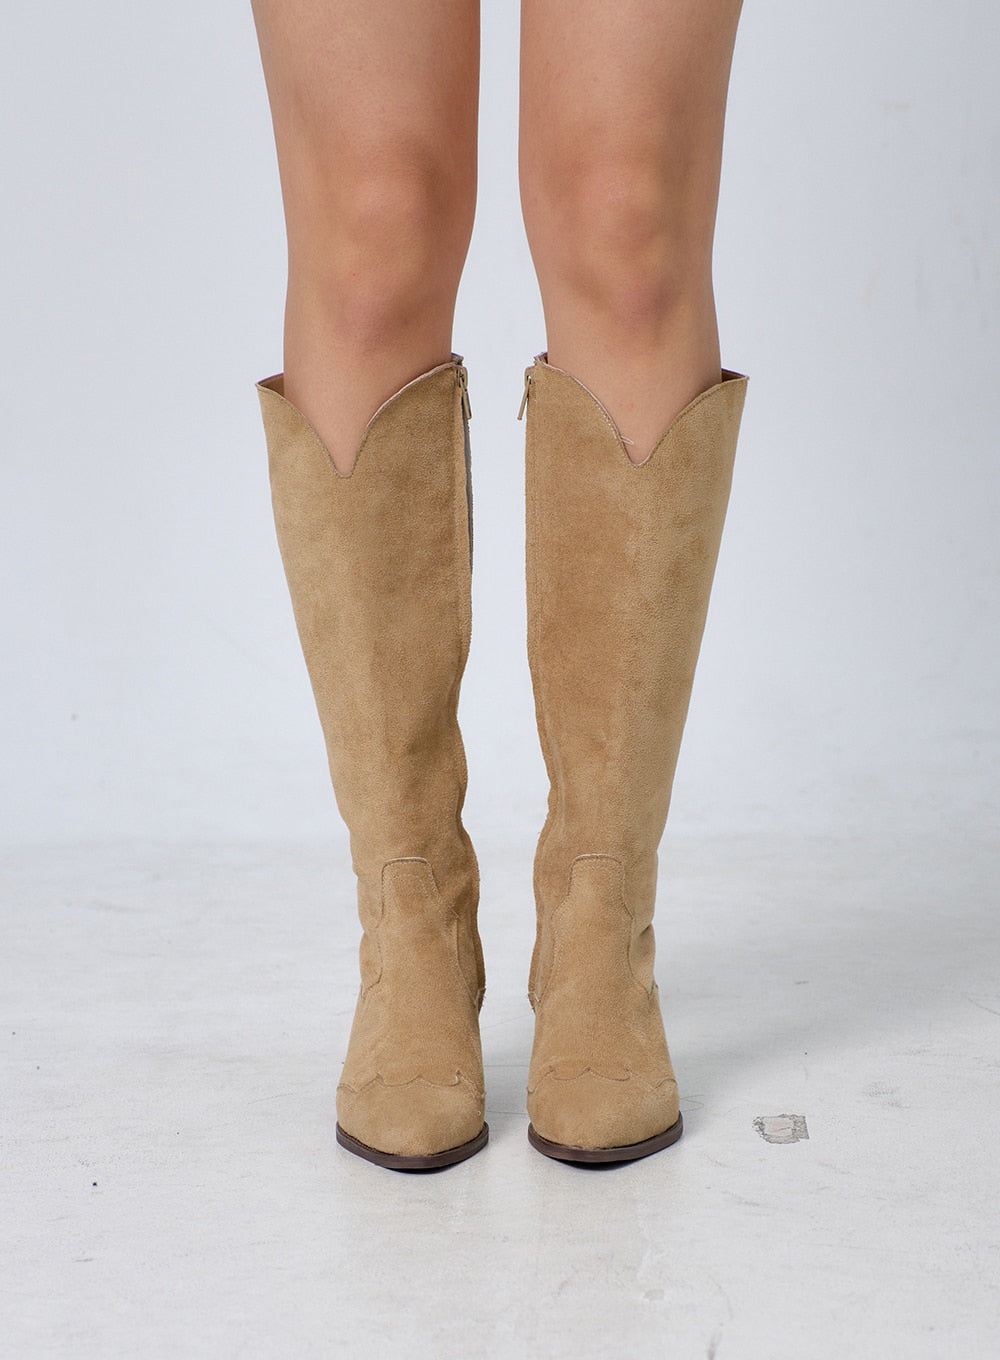 Western Knee High Boots BJ331